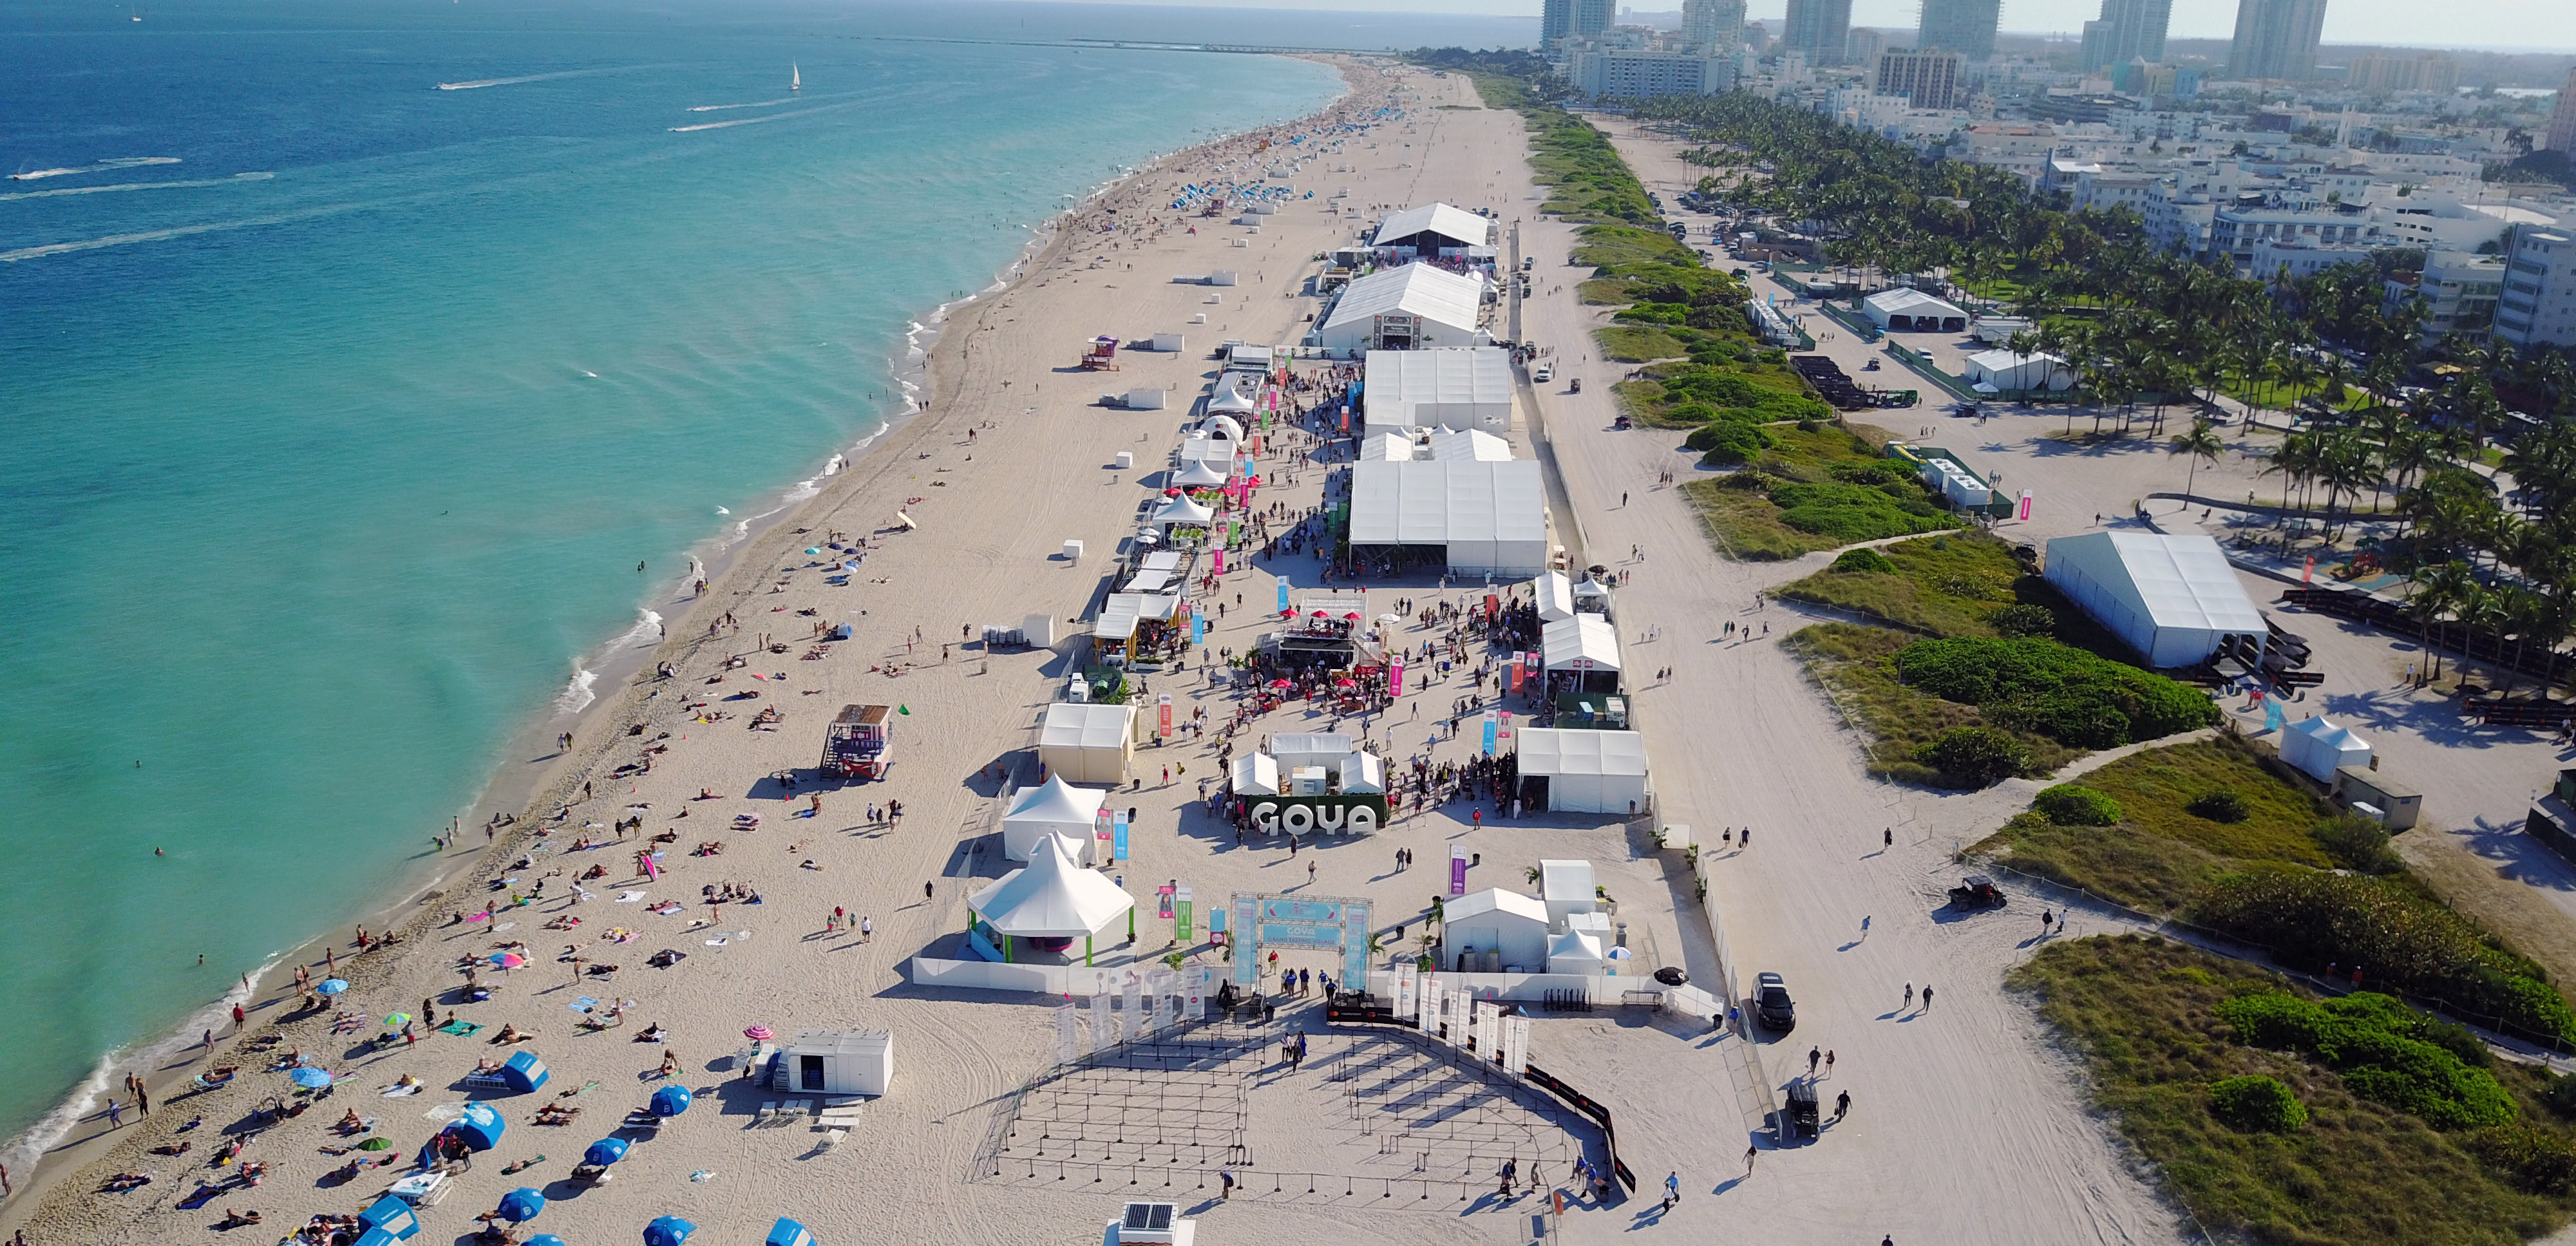 Miami Beach Welcomes Food and Wine Lovers for the 20th anniversary of the Food Network & Cooking Channel South Beach Wine & Food Festival presented by Capital One.